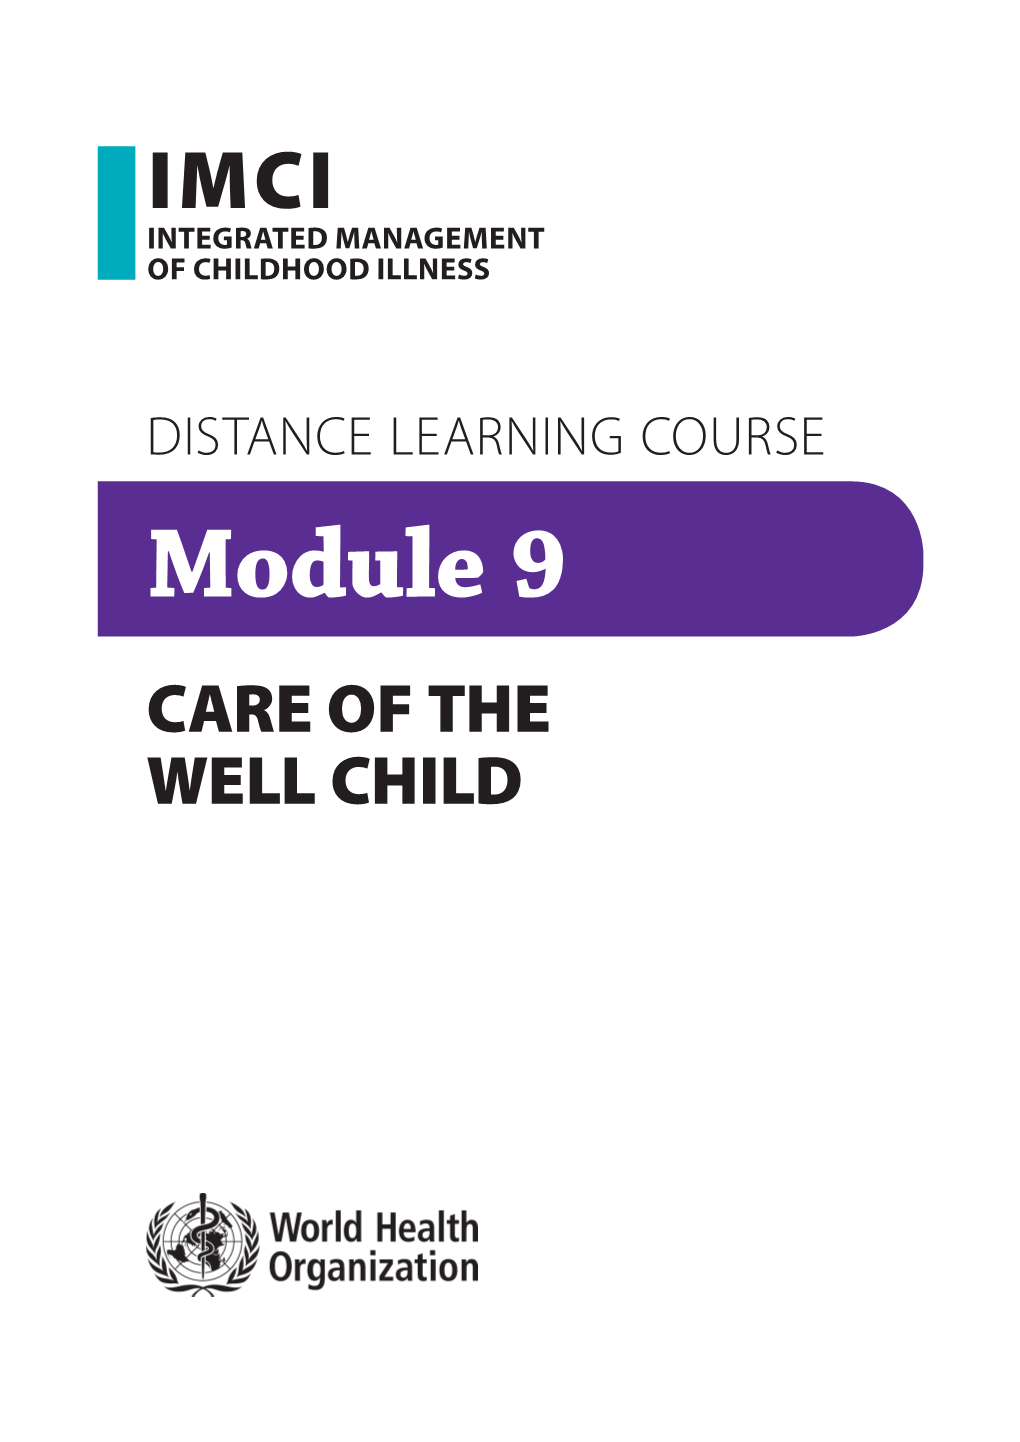 Module 9 CARE of the WELL CHILD WHO Library Cataloguing-In-Publication Data: Integrated Management of Childhood Illness: Distance Learning Course